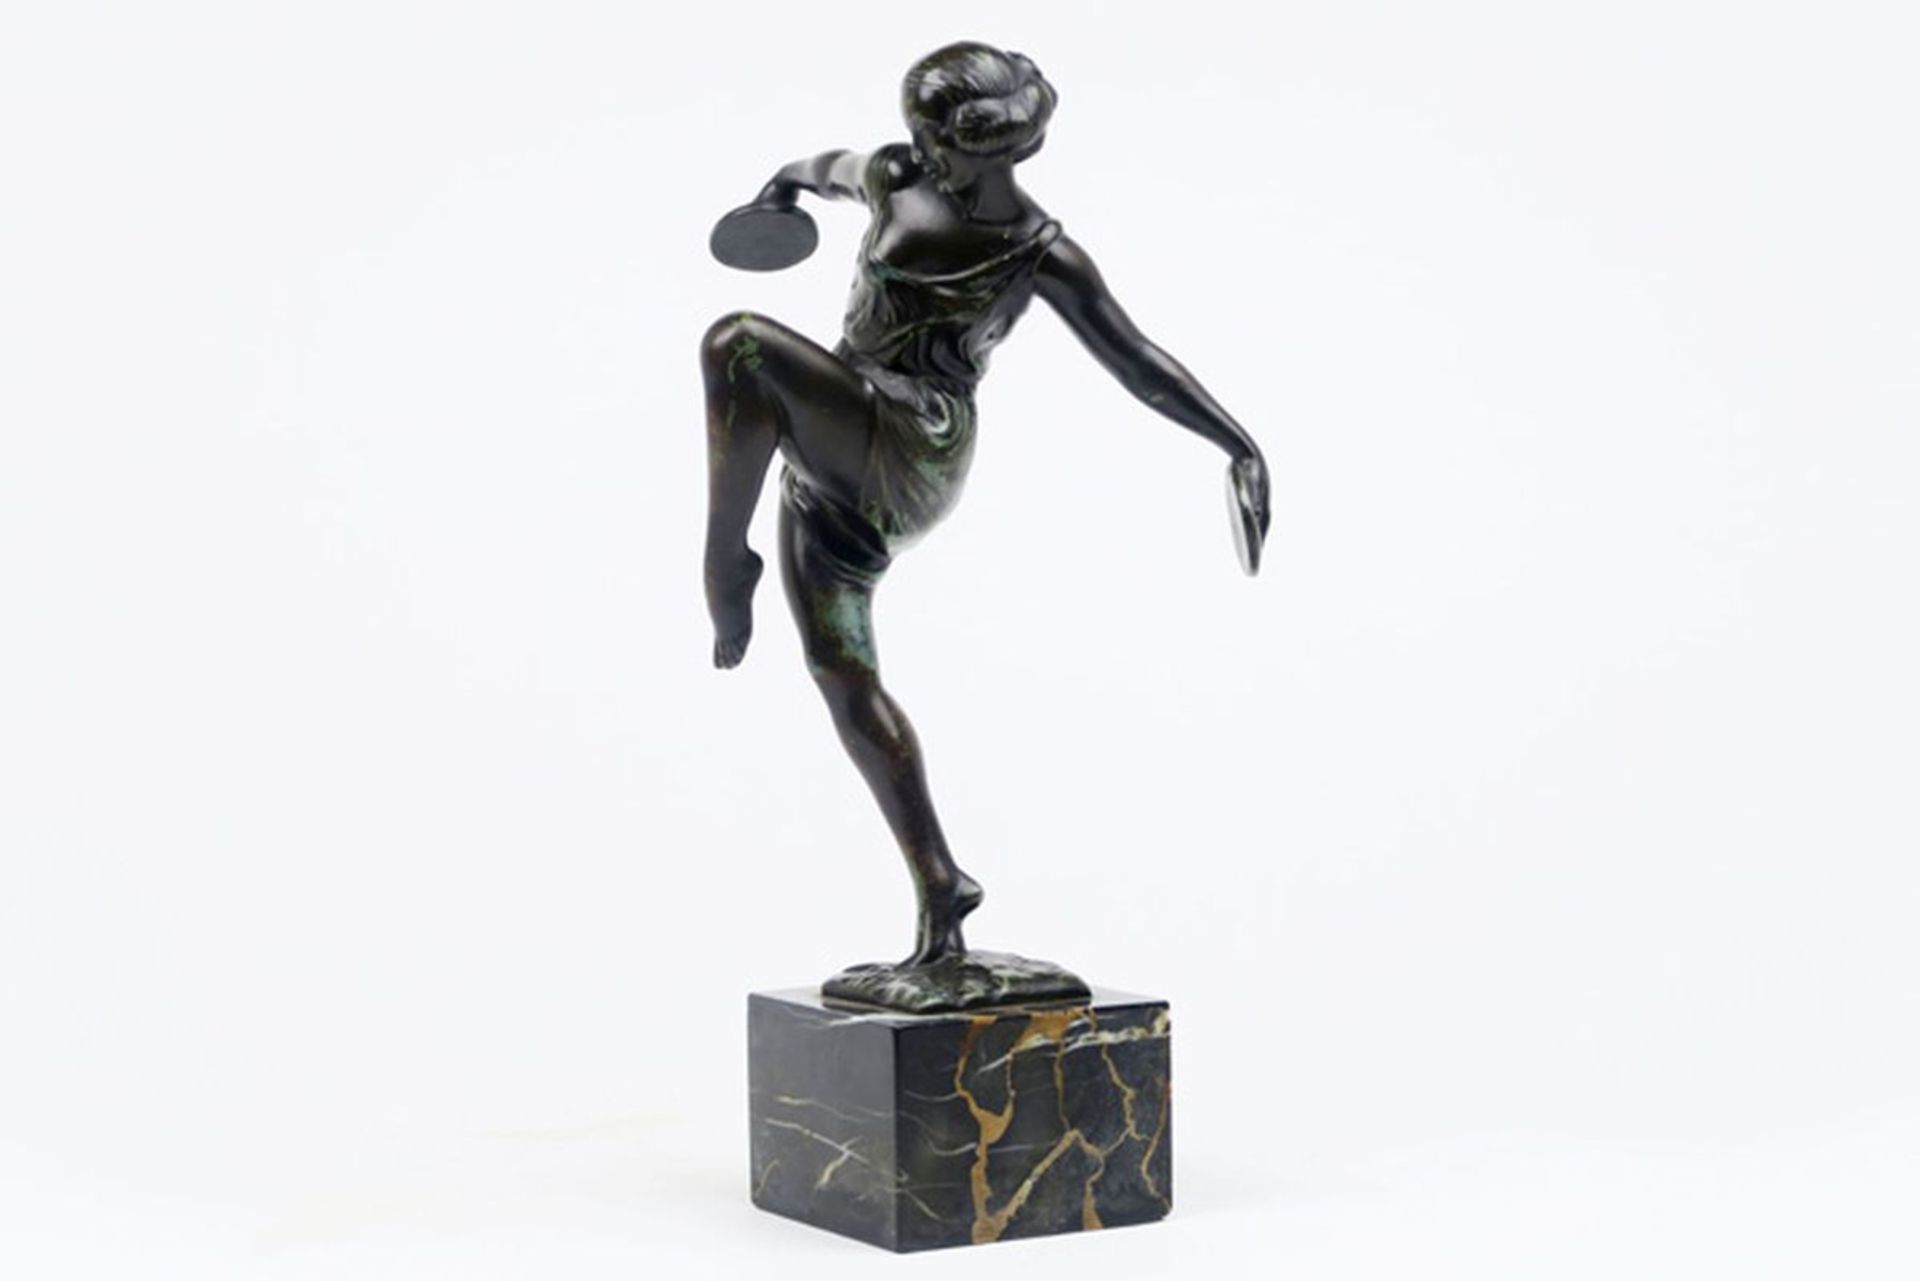 Art Deco sculpture in bronze on a base in typical marble - signed Fayral (Pierre [...] - Image 3 of 4